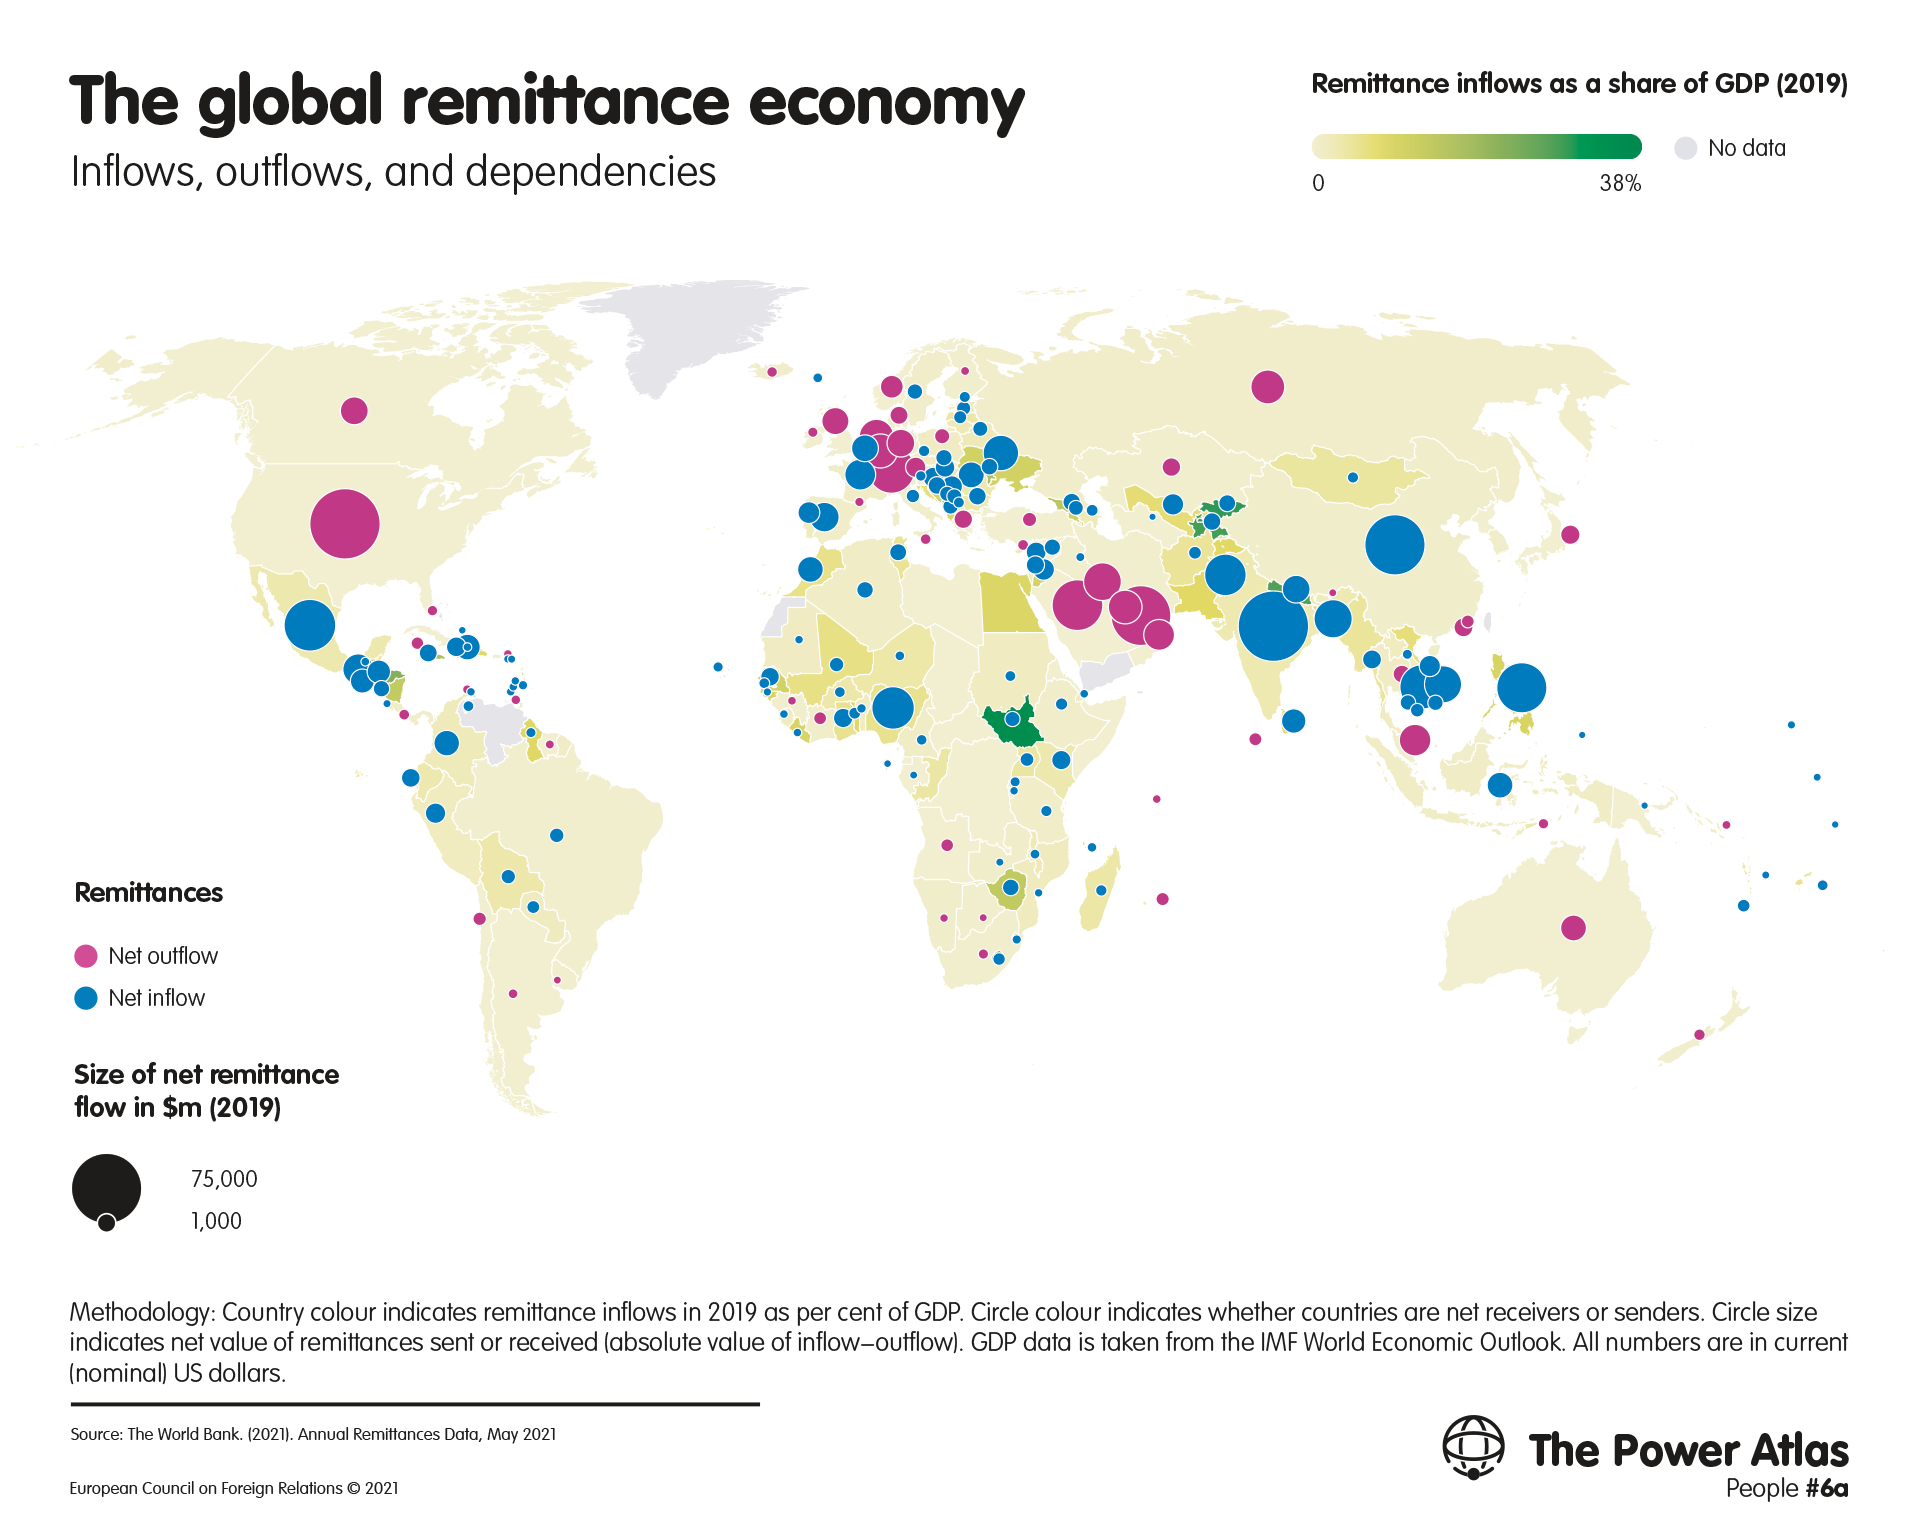 The global remittance economy: Inflows, outflows, and dependencies